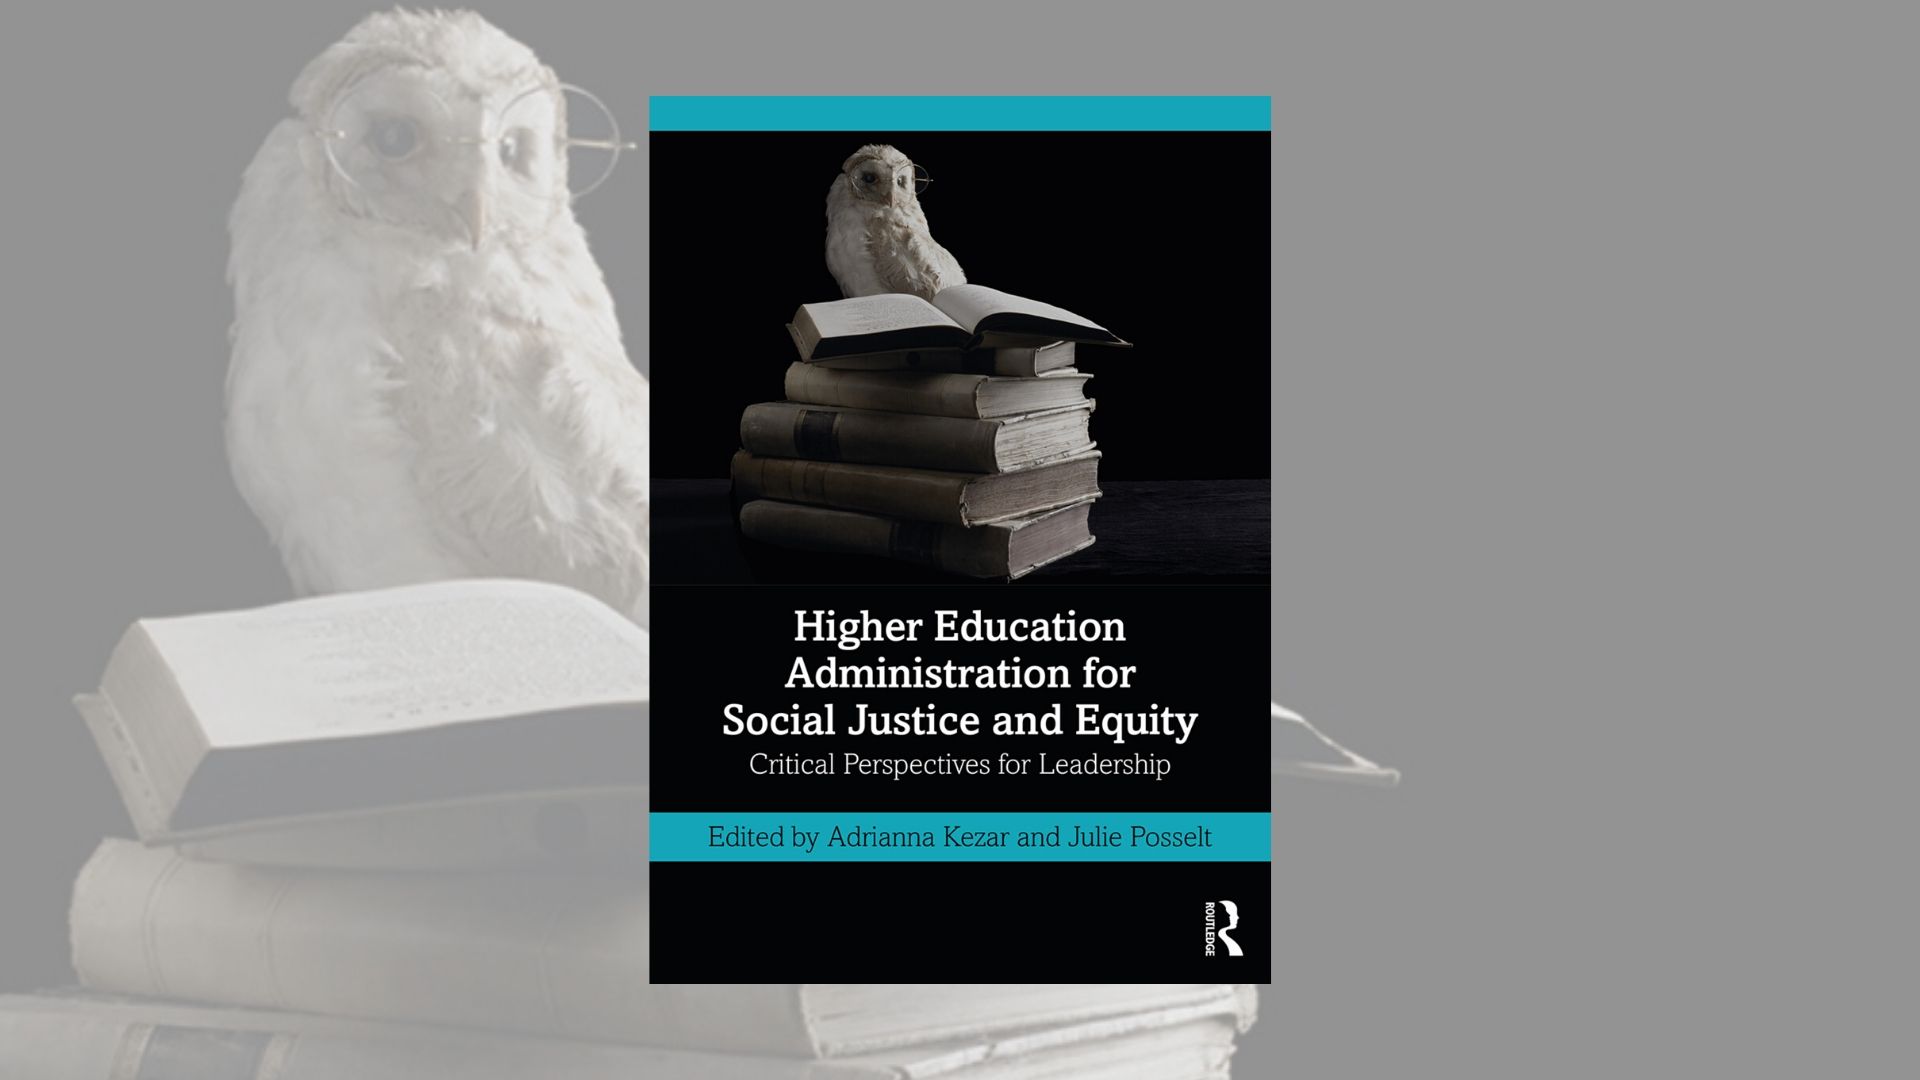 New Book: Higher Education Administration for Social Justice and Equity